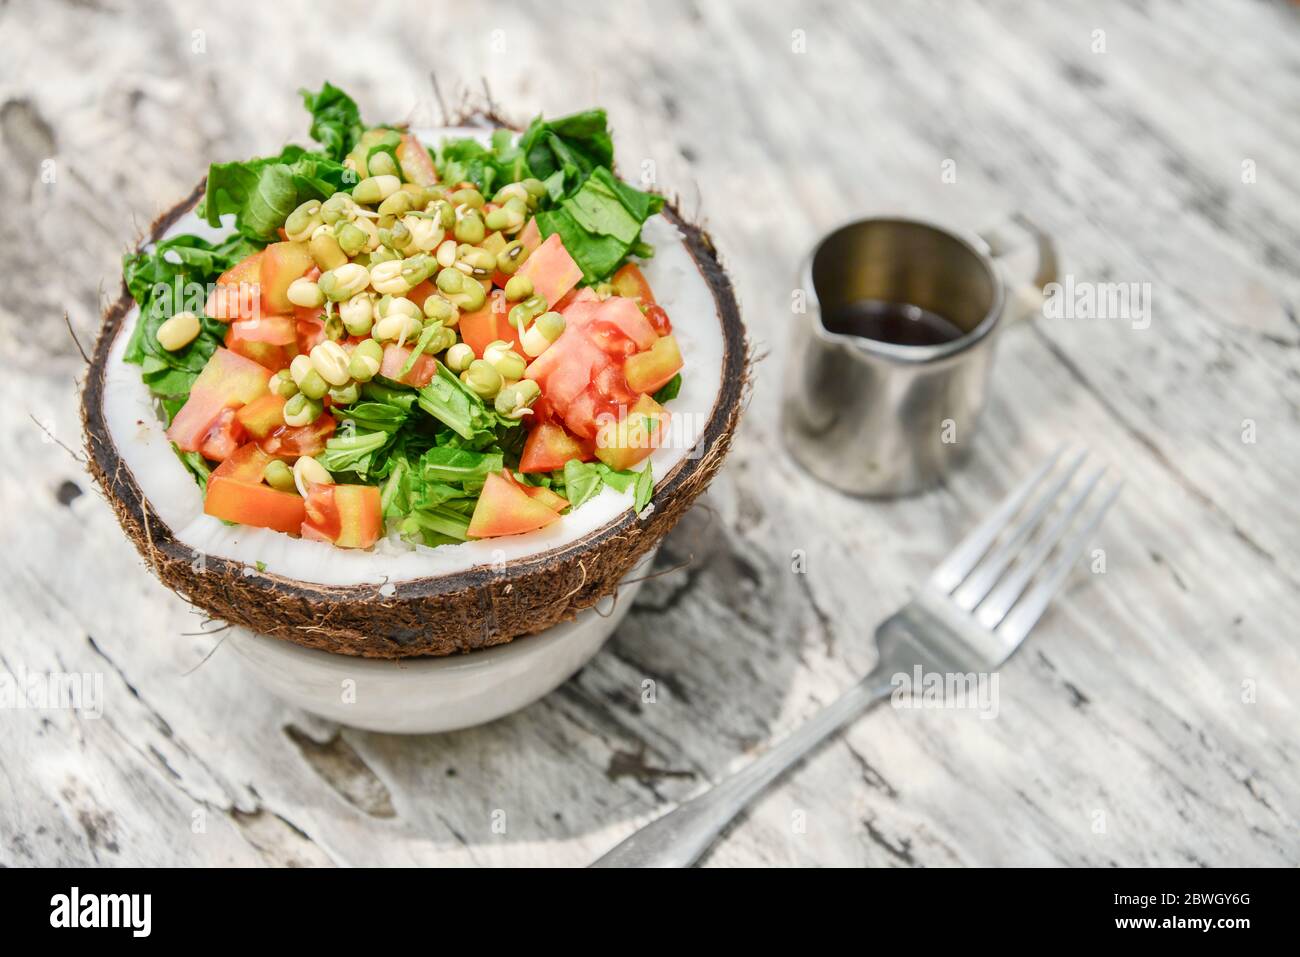 Salad with tomato, greens,  sprouted mung beans and coconut pulp served in half coconut on white wooden background Stock Photo